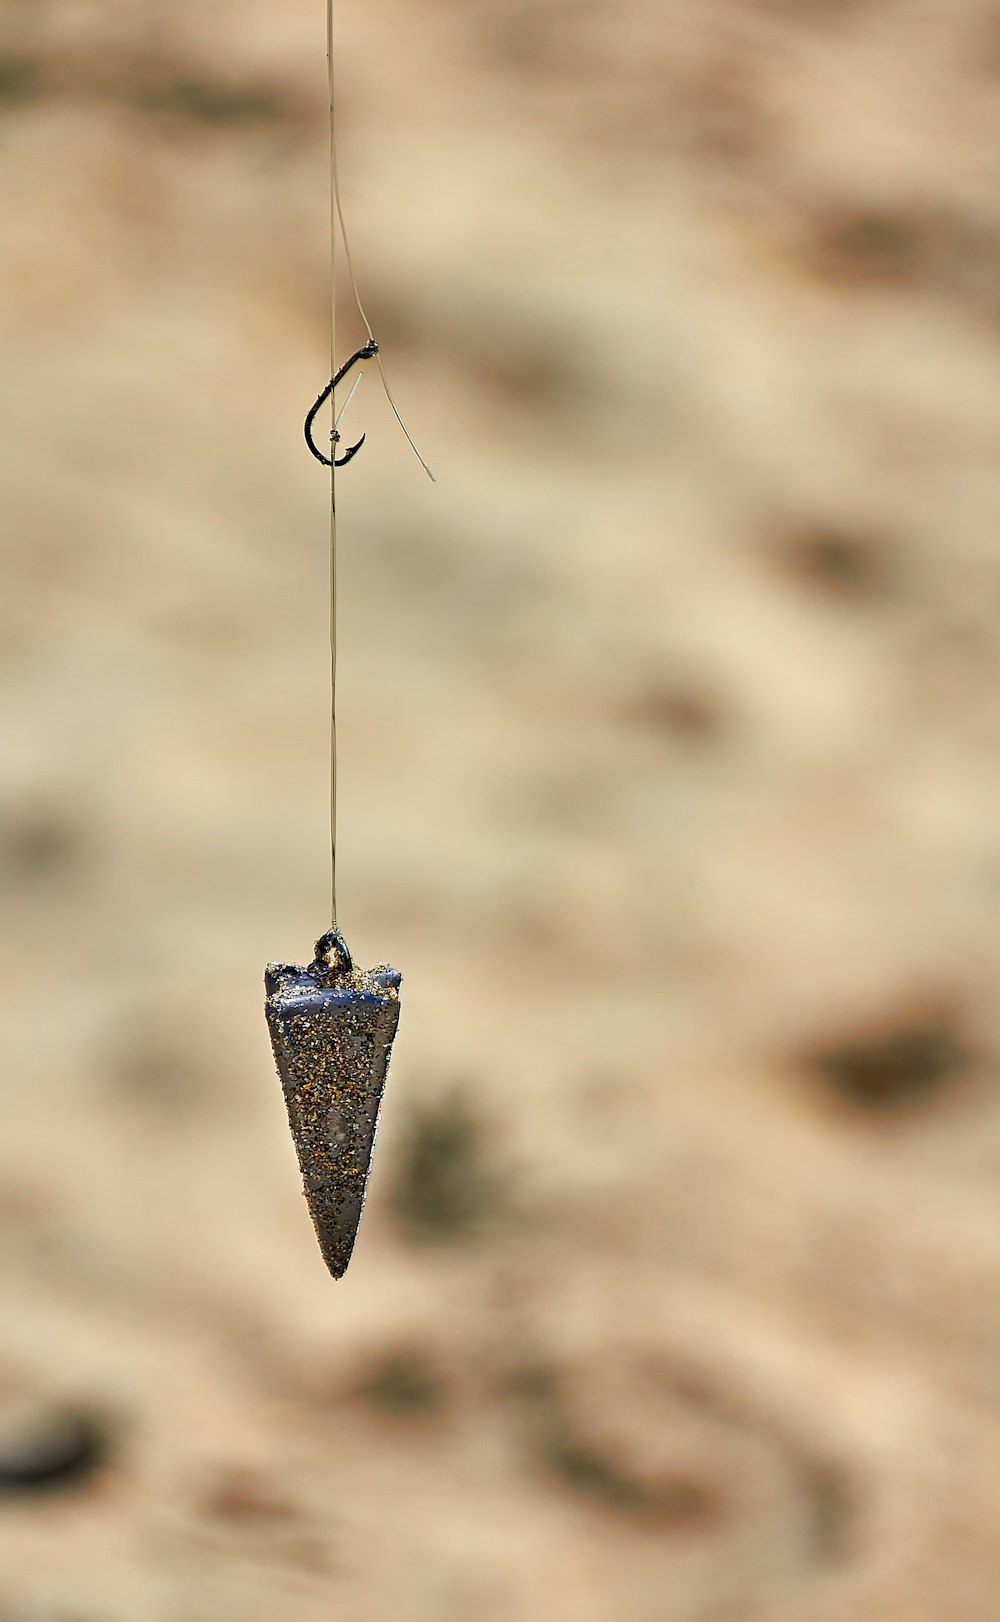 a wind chime hanging from a wire in the air